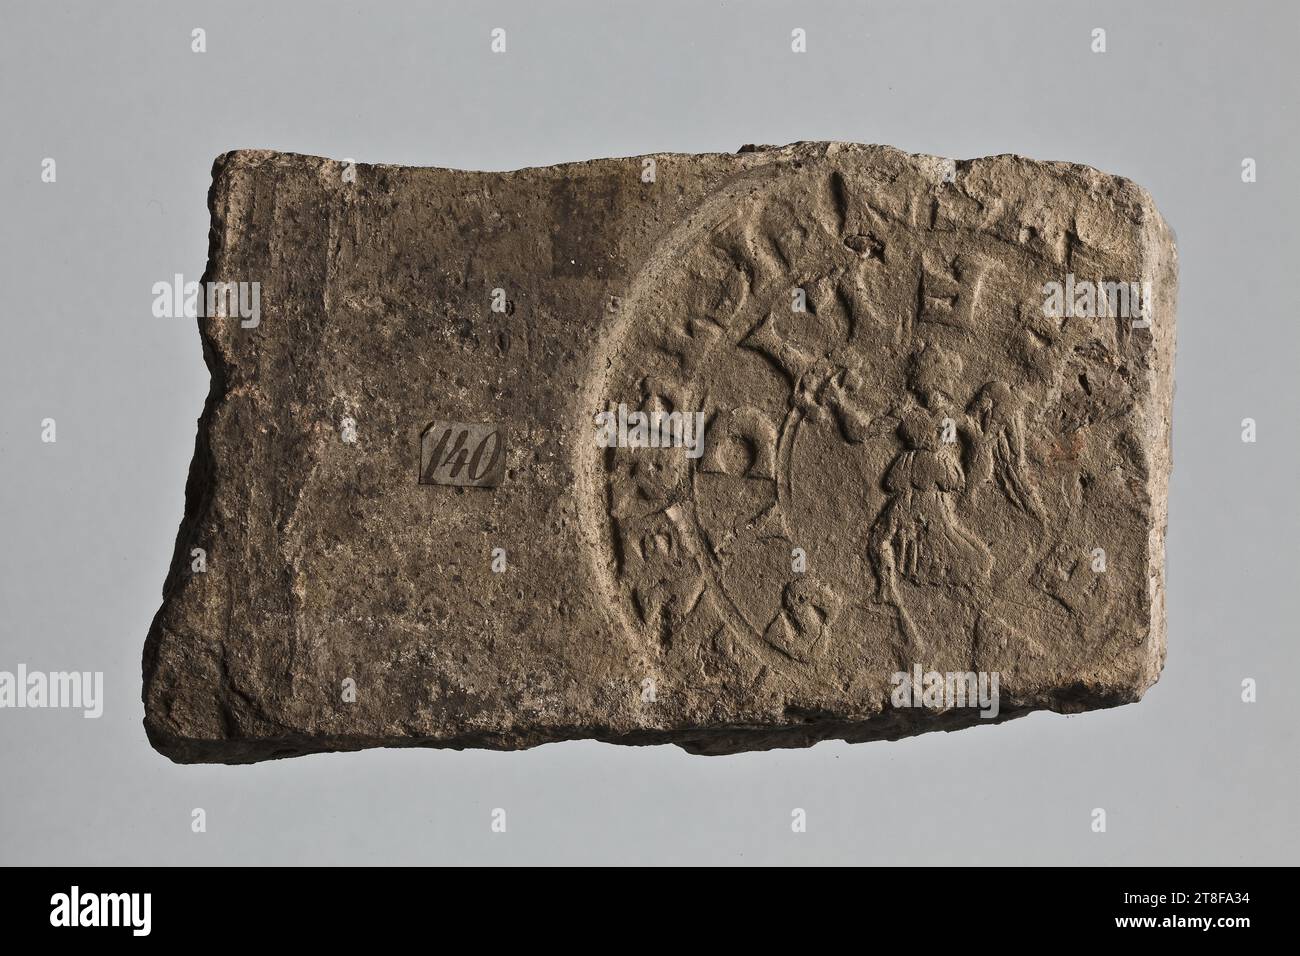 Brick with stamp: (?)AUGNFIGTERENT(?), AE(?)FELICIS, 211 - 217, Brick, Fired, Modelled, Height 8.2 cm, Width 14.3 cm, [ (?)]AUGNFIGTERENT[ (?)], AE[ (?)]FELICIS Stock Photo